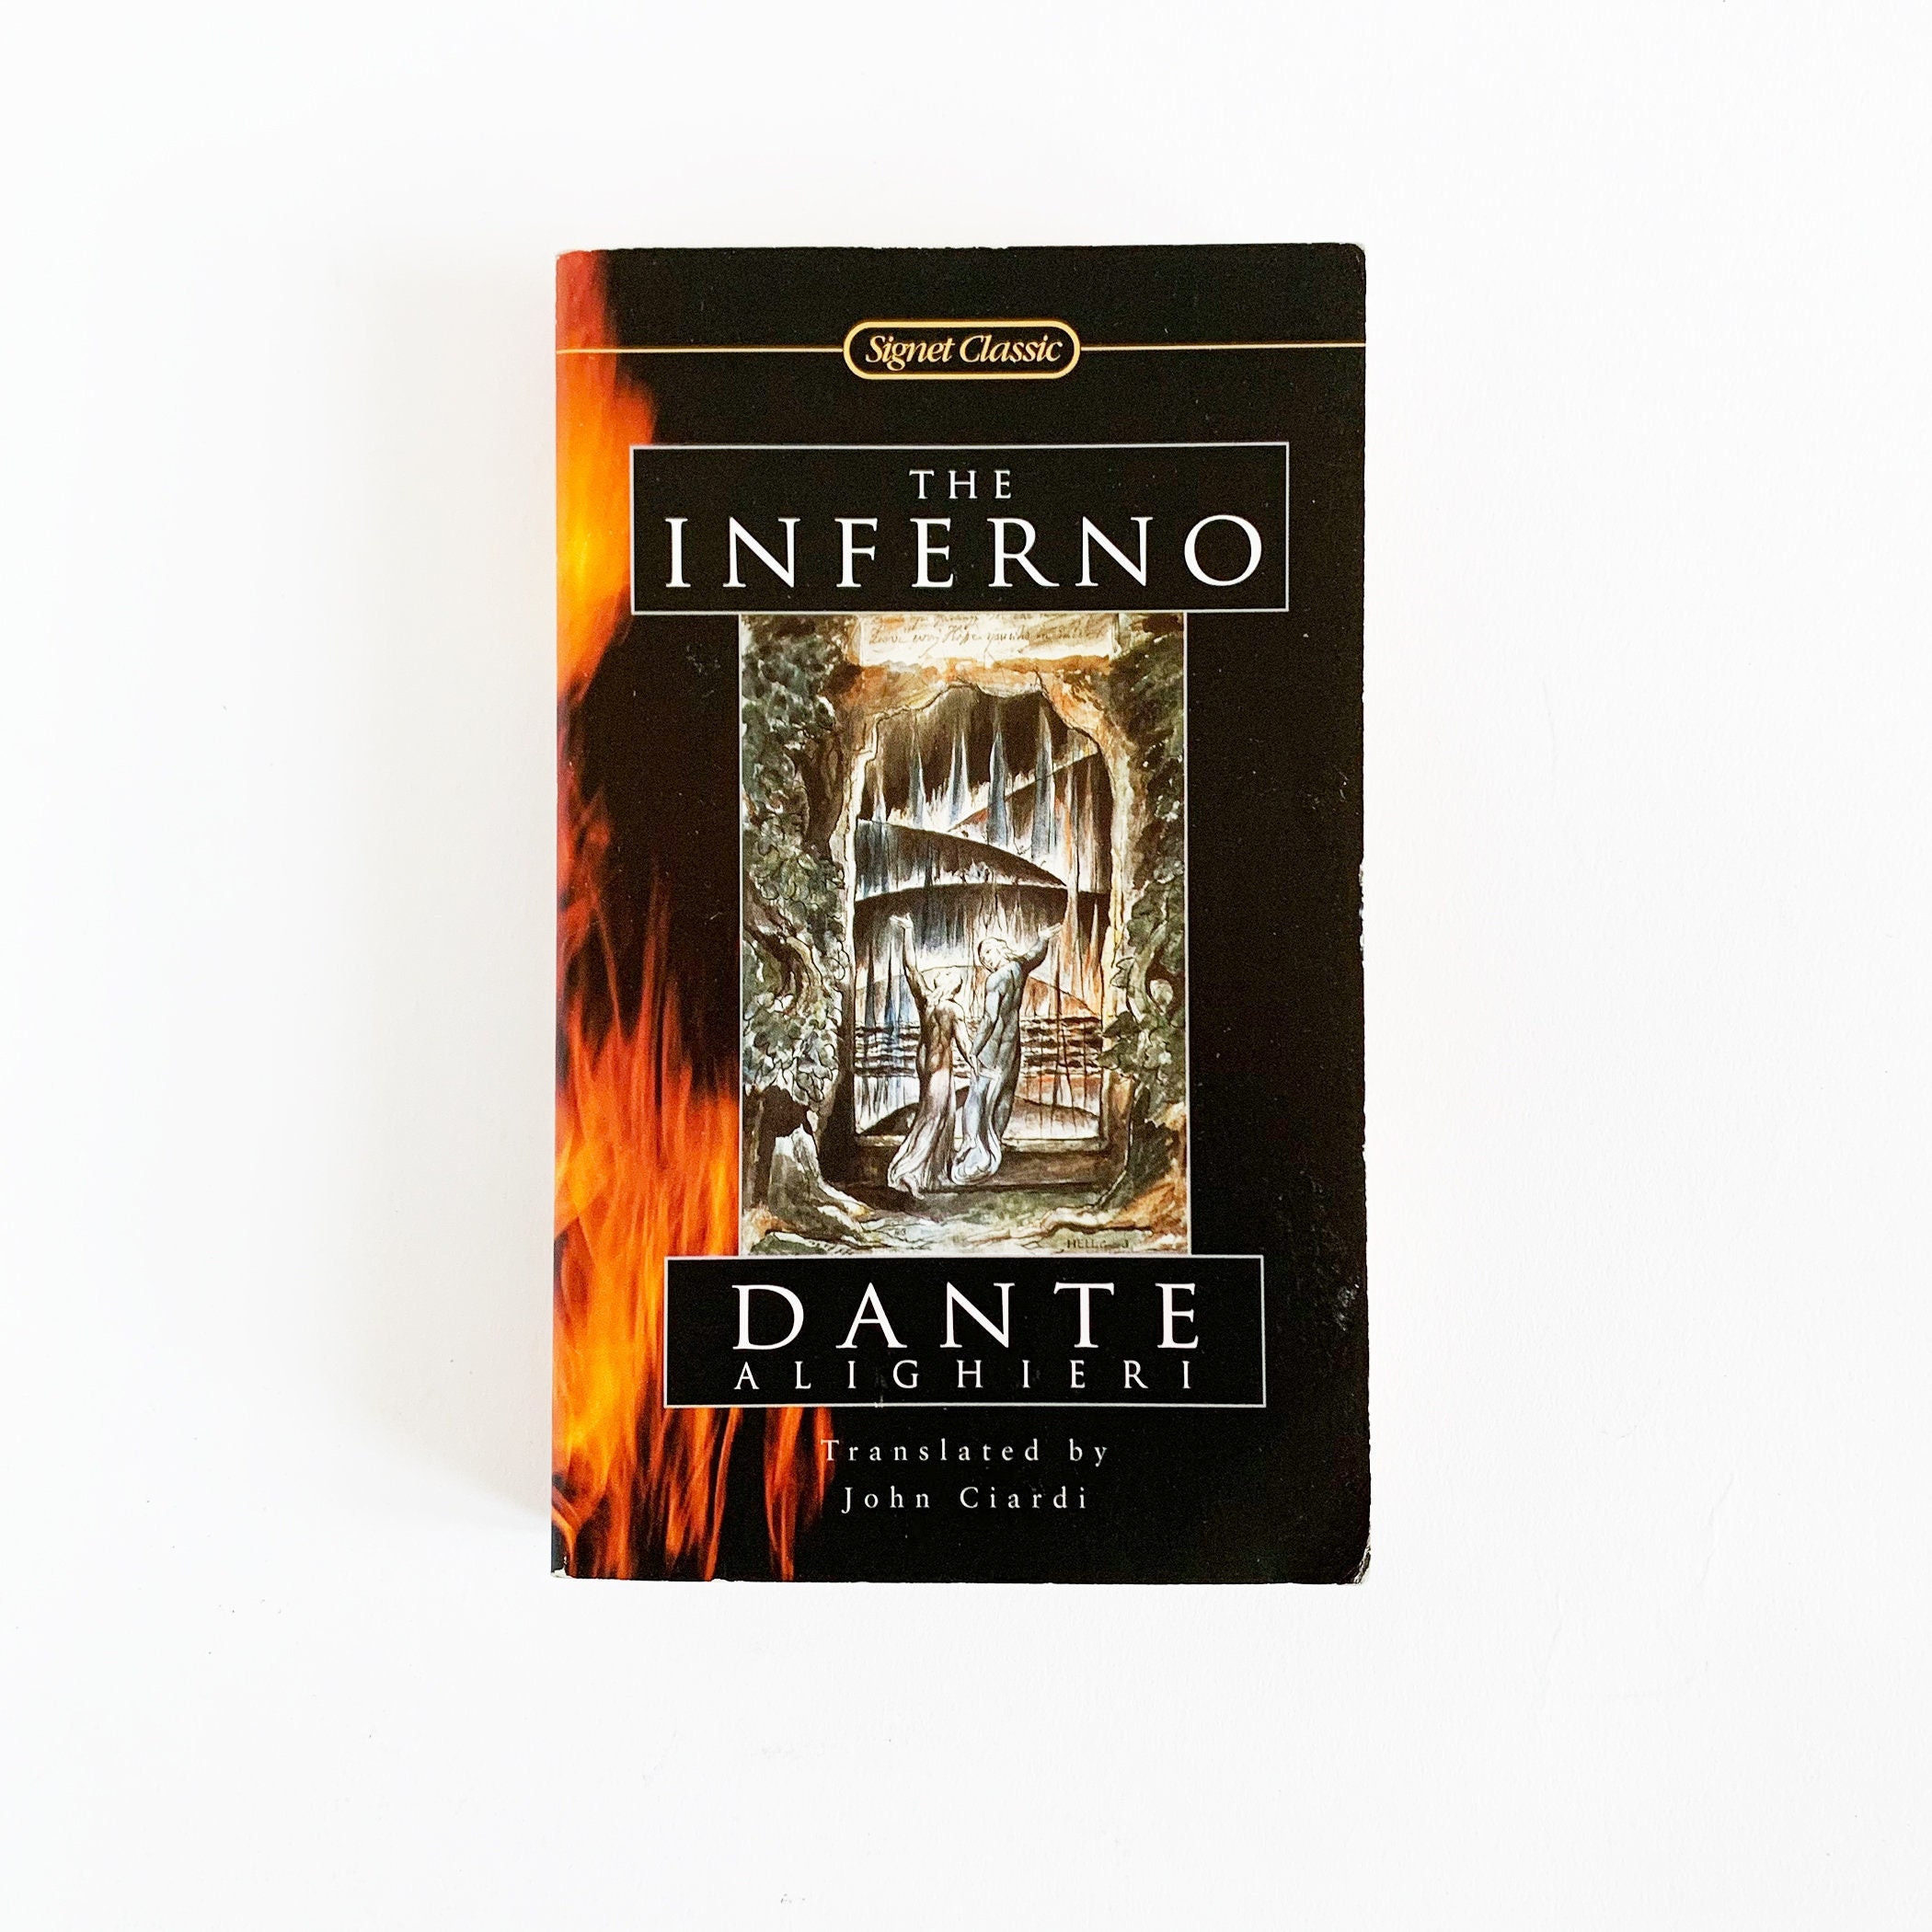 dante alighieri - inferno - First Edition - Seller-Supplied Images - Books  - AbeBooks